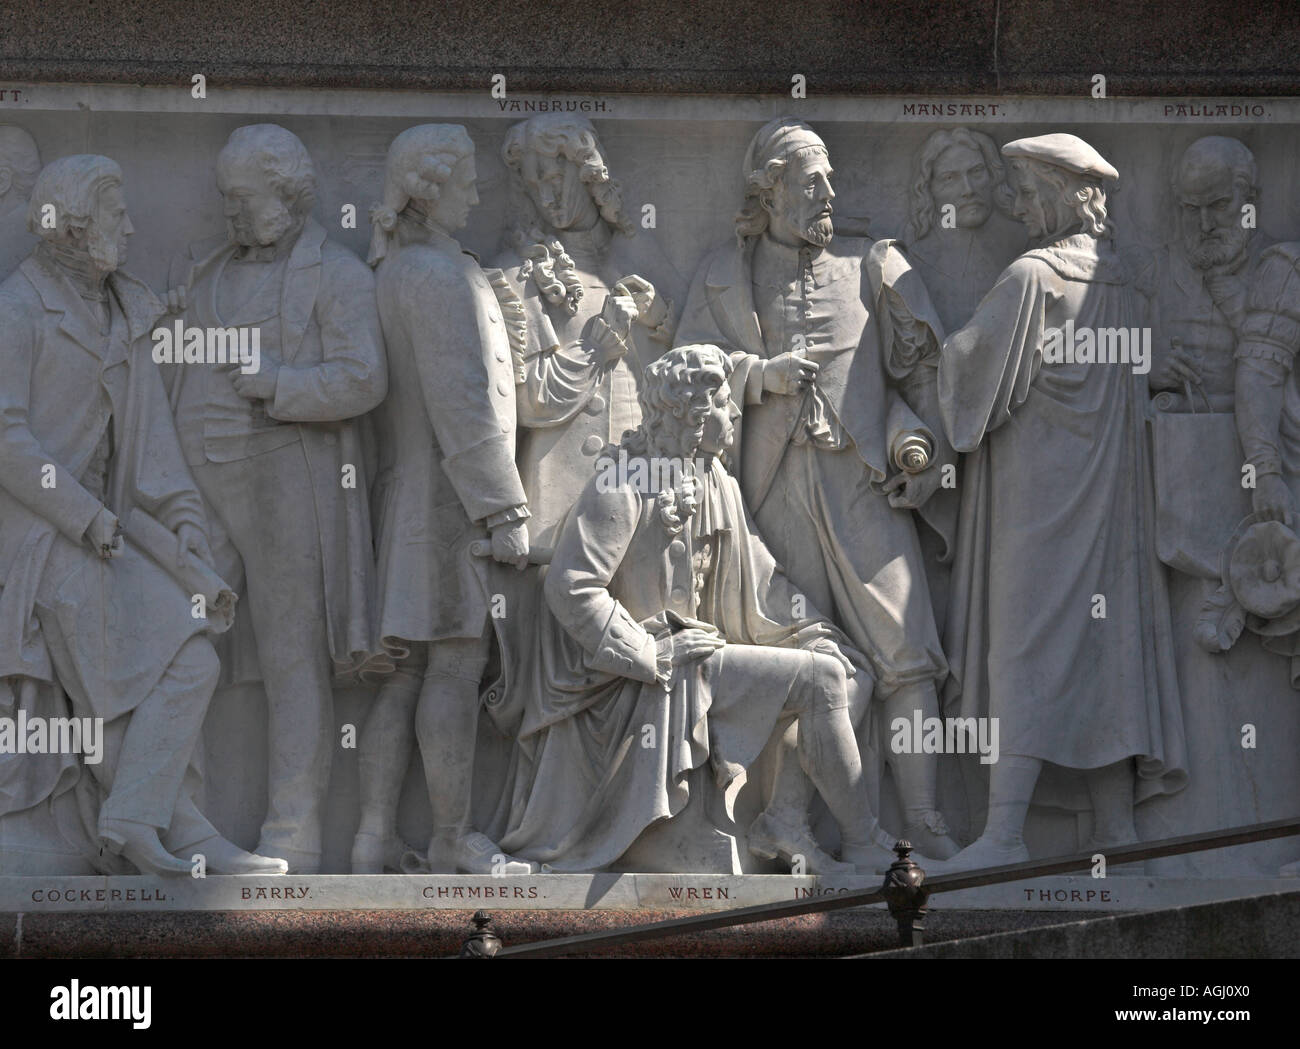 Sir Christopher Wren seated next to Vanbrugh and other historic notaries on the frieze of the Albert Memorial London Stock Photo